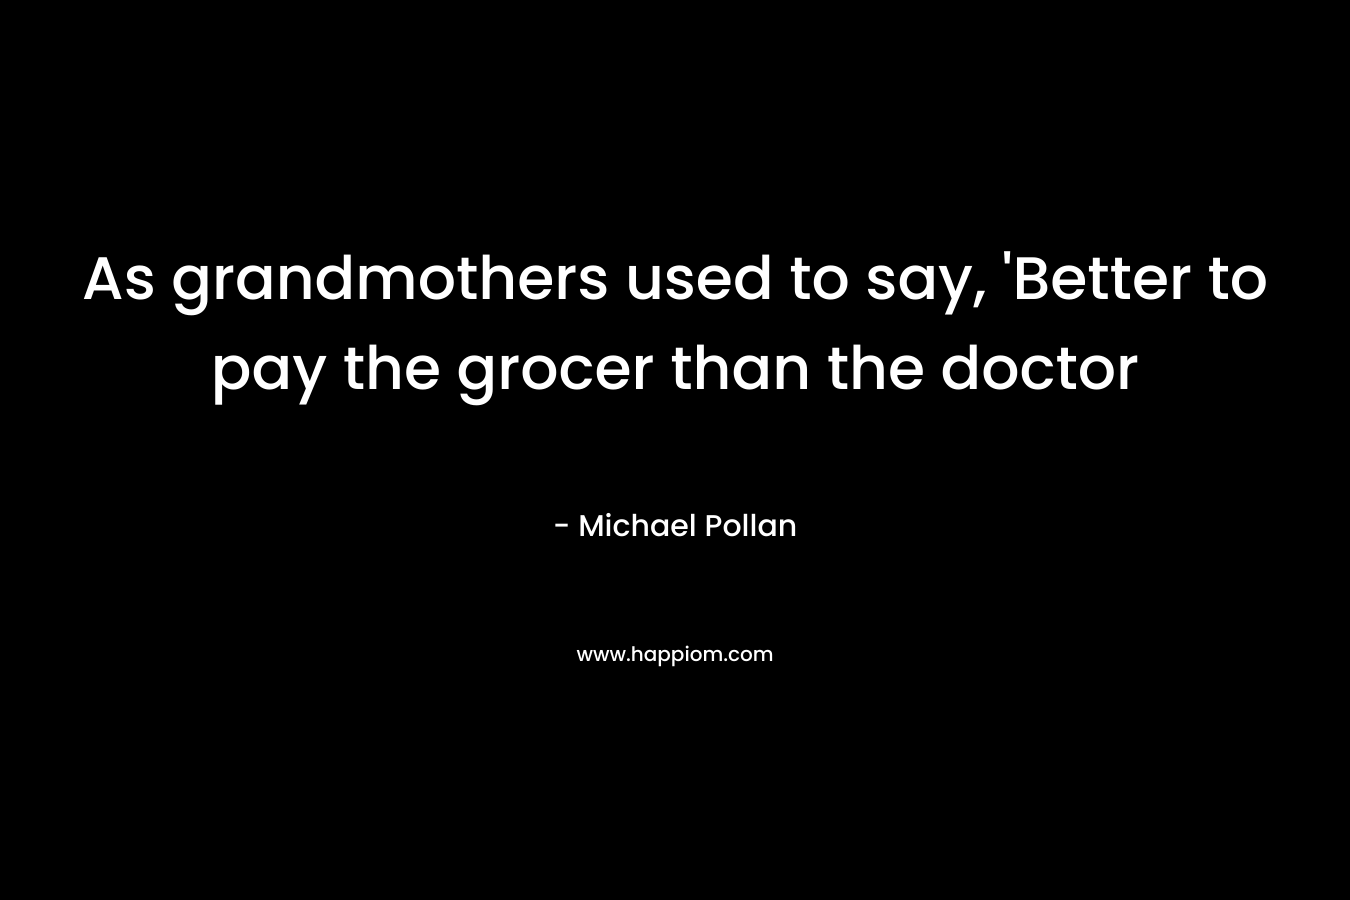 As grandmothers used to say, 'Better to pay the grocer than the doctor